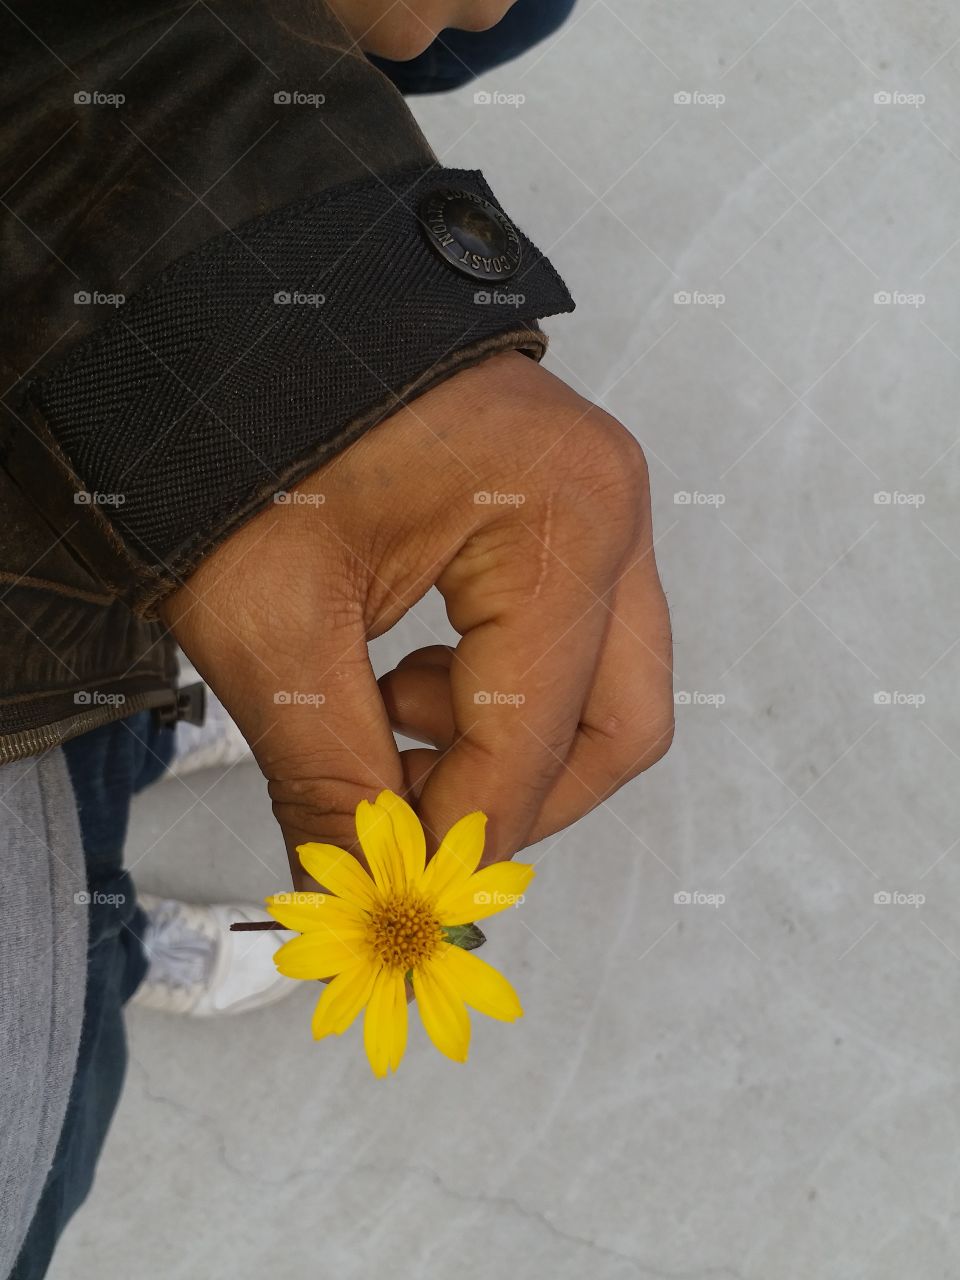 some hand and flower picture using my phone